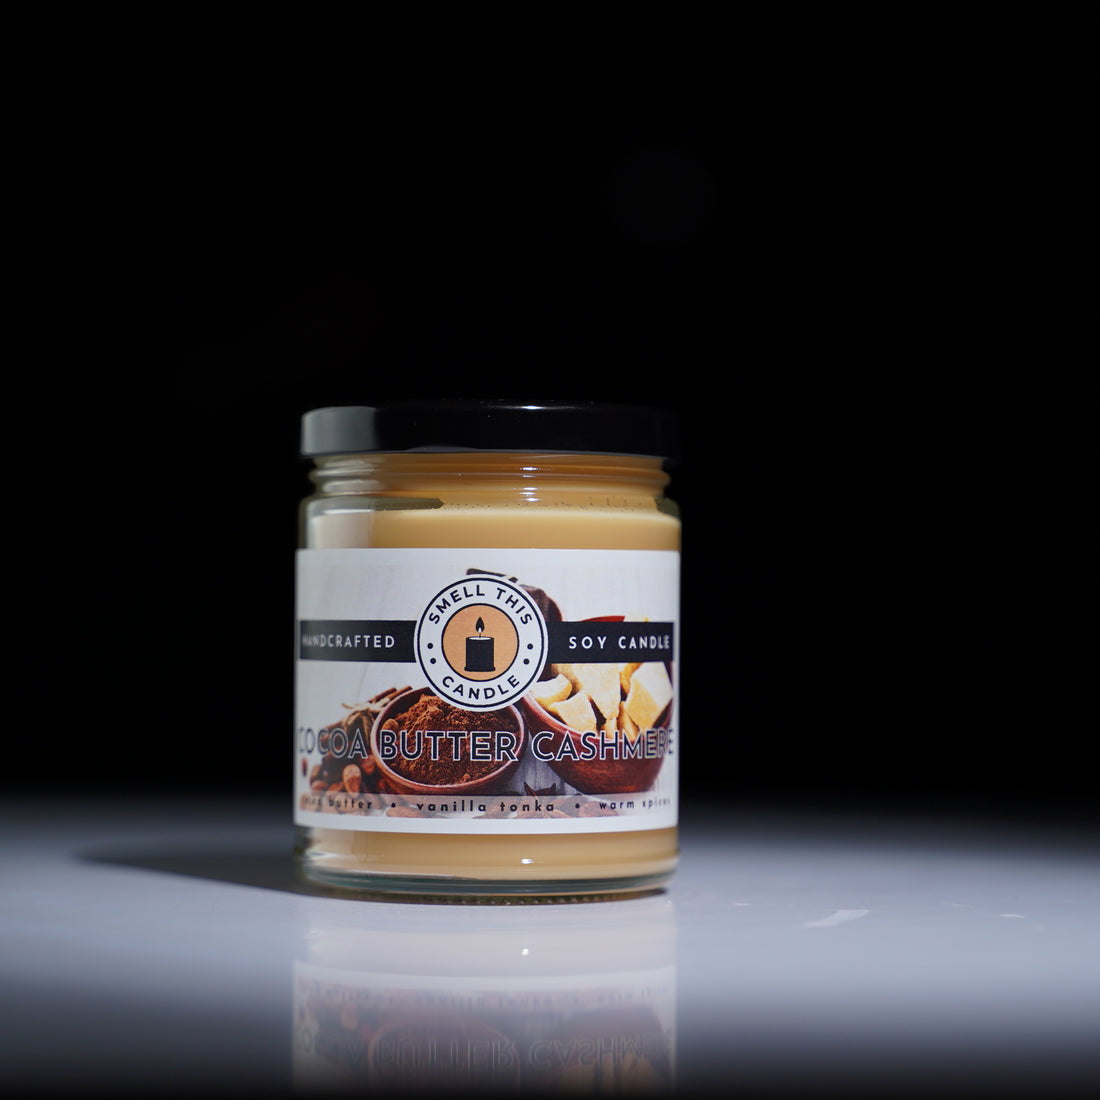 Cocoa Butter Cashmere candle